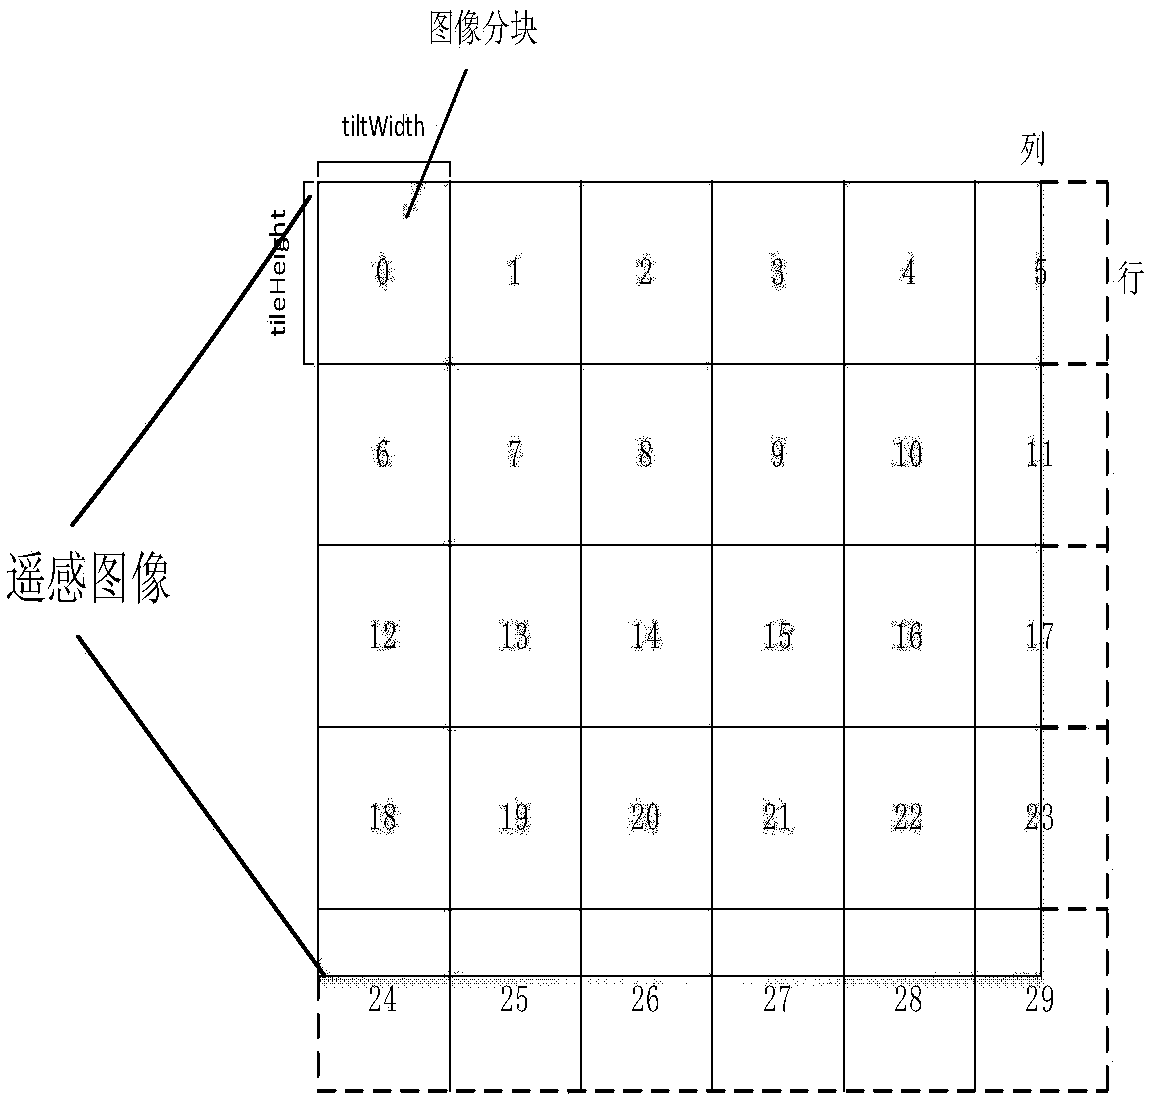 Rapid caching method for large-scale remote sensing image